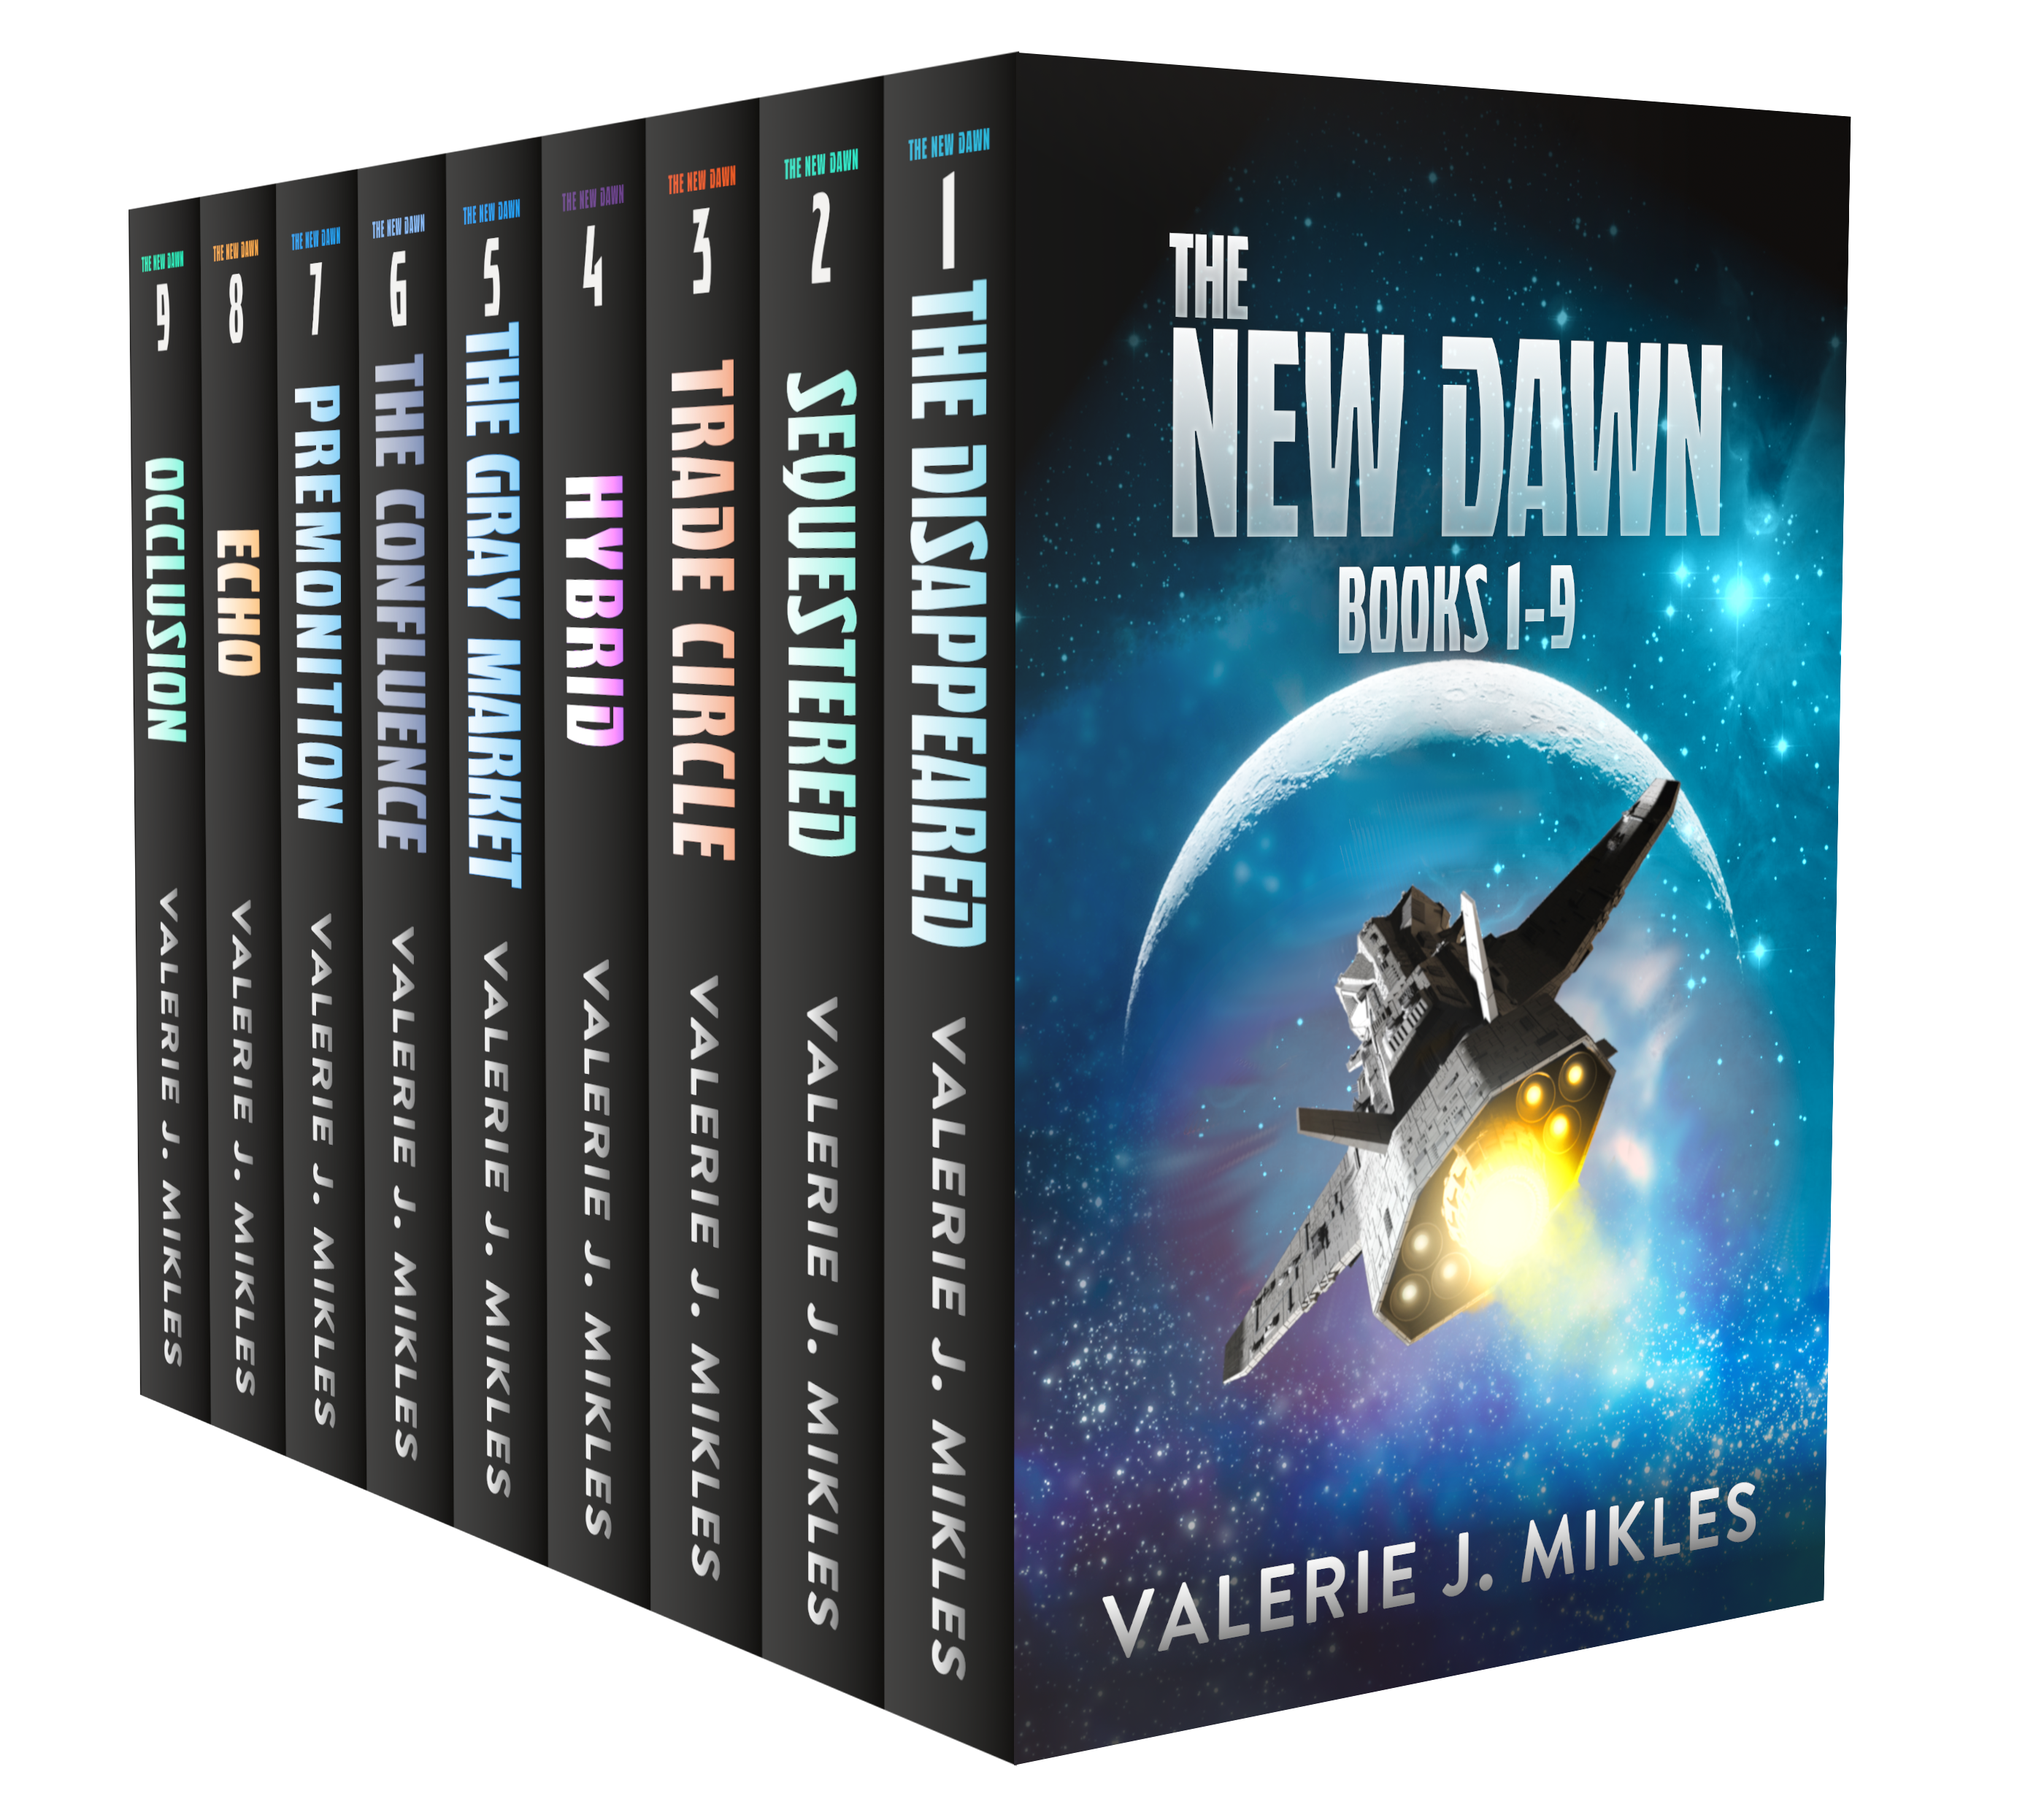 A collection of science fiction book covers for the New Dawn series.